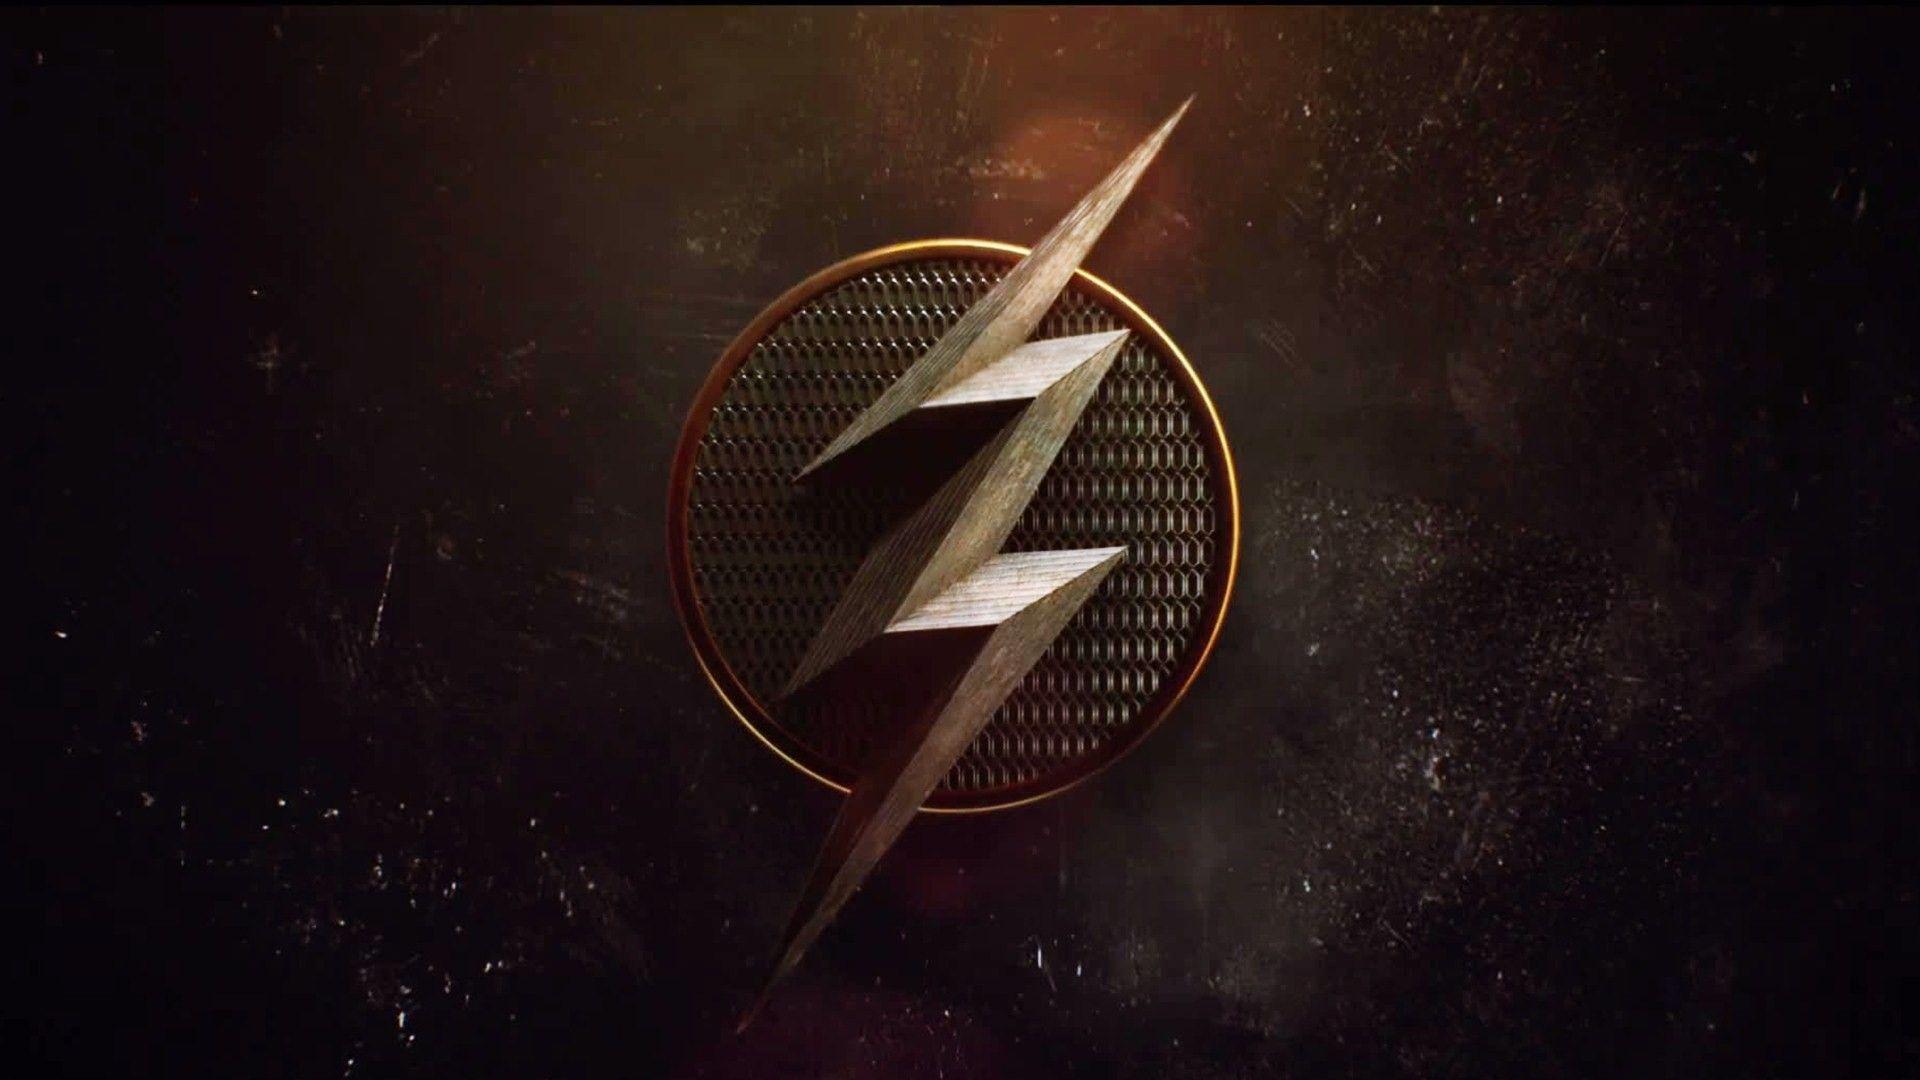 The Flash Zoom 4k Wallpapers Top Free The Flash Zoom 4k